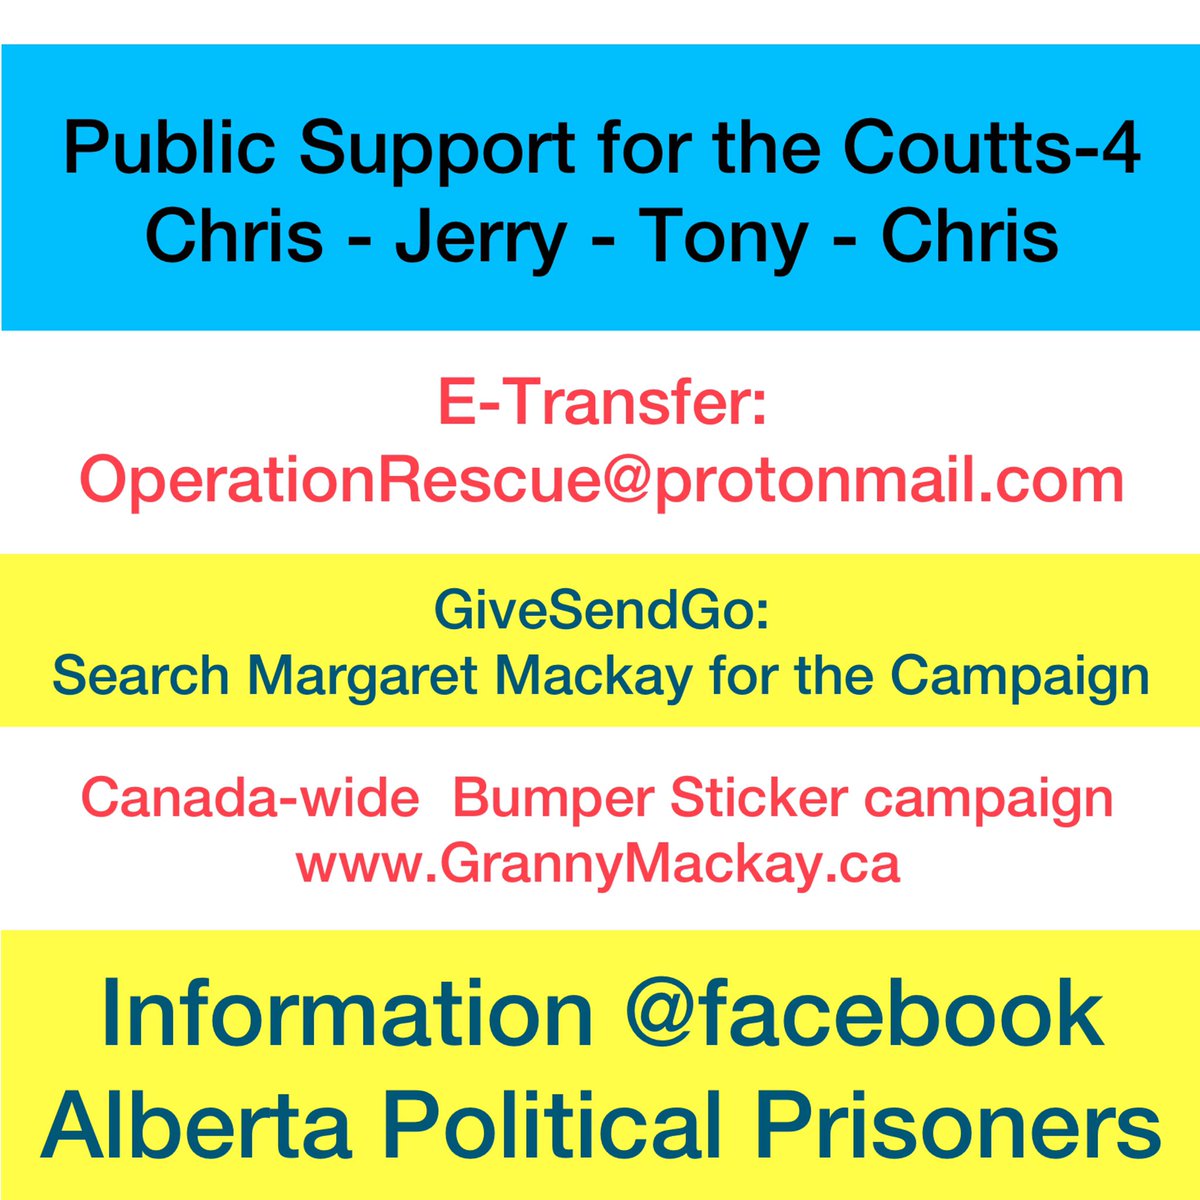 OUR 4 Alberta Family Men arrested from Coutts, AB. 
482 days Remand Jail since February 2022. 
Trial UNKNOWN 2024. 
#chrisjerrytonychris #AlbertaPoliticalPrisoners